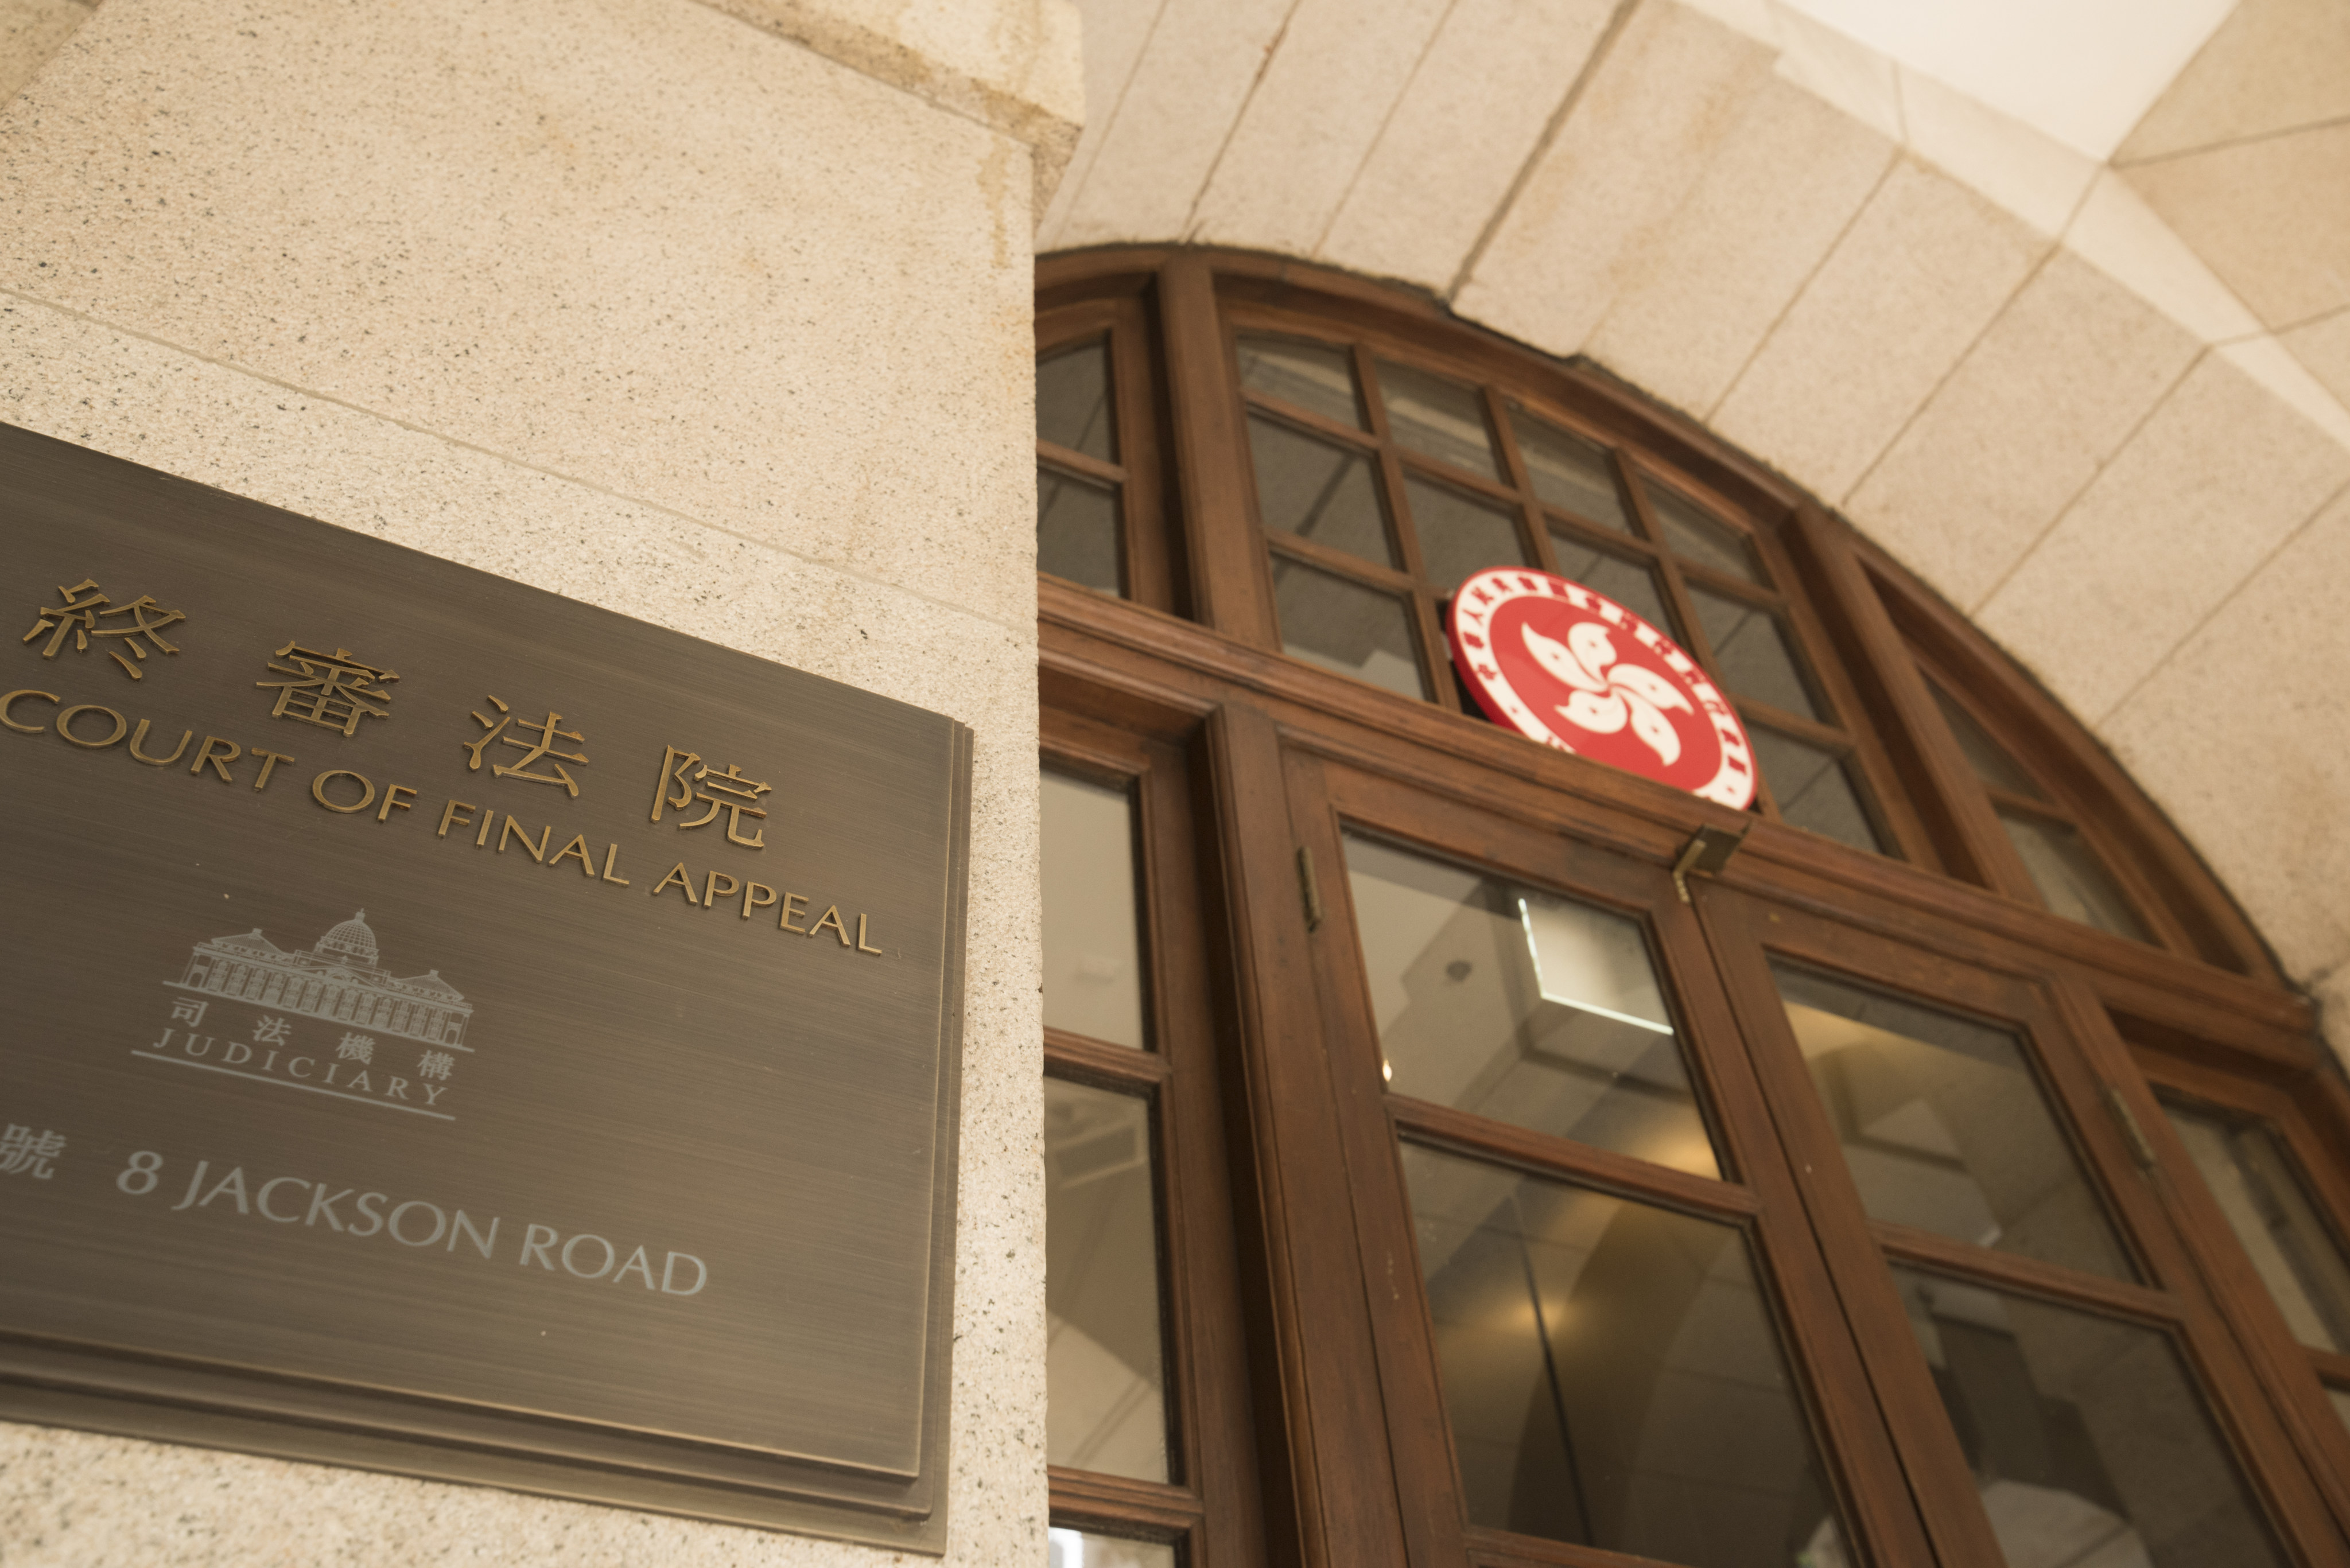 Hong Kong’s Court of Final Appeal building. The NPC interpretation does not concern overseas lawyers who can still apply for ad hoc admission to represent parties in civil or criminal cases not involving national security. Photo: Shutterstock